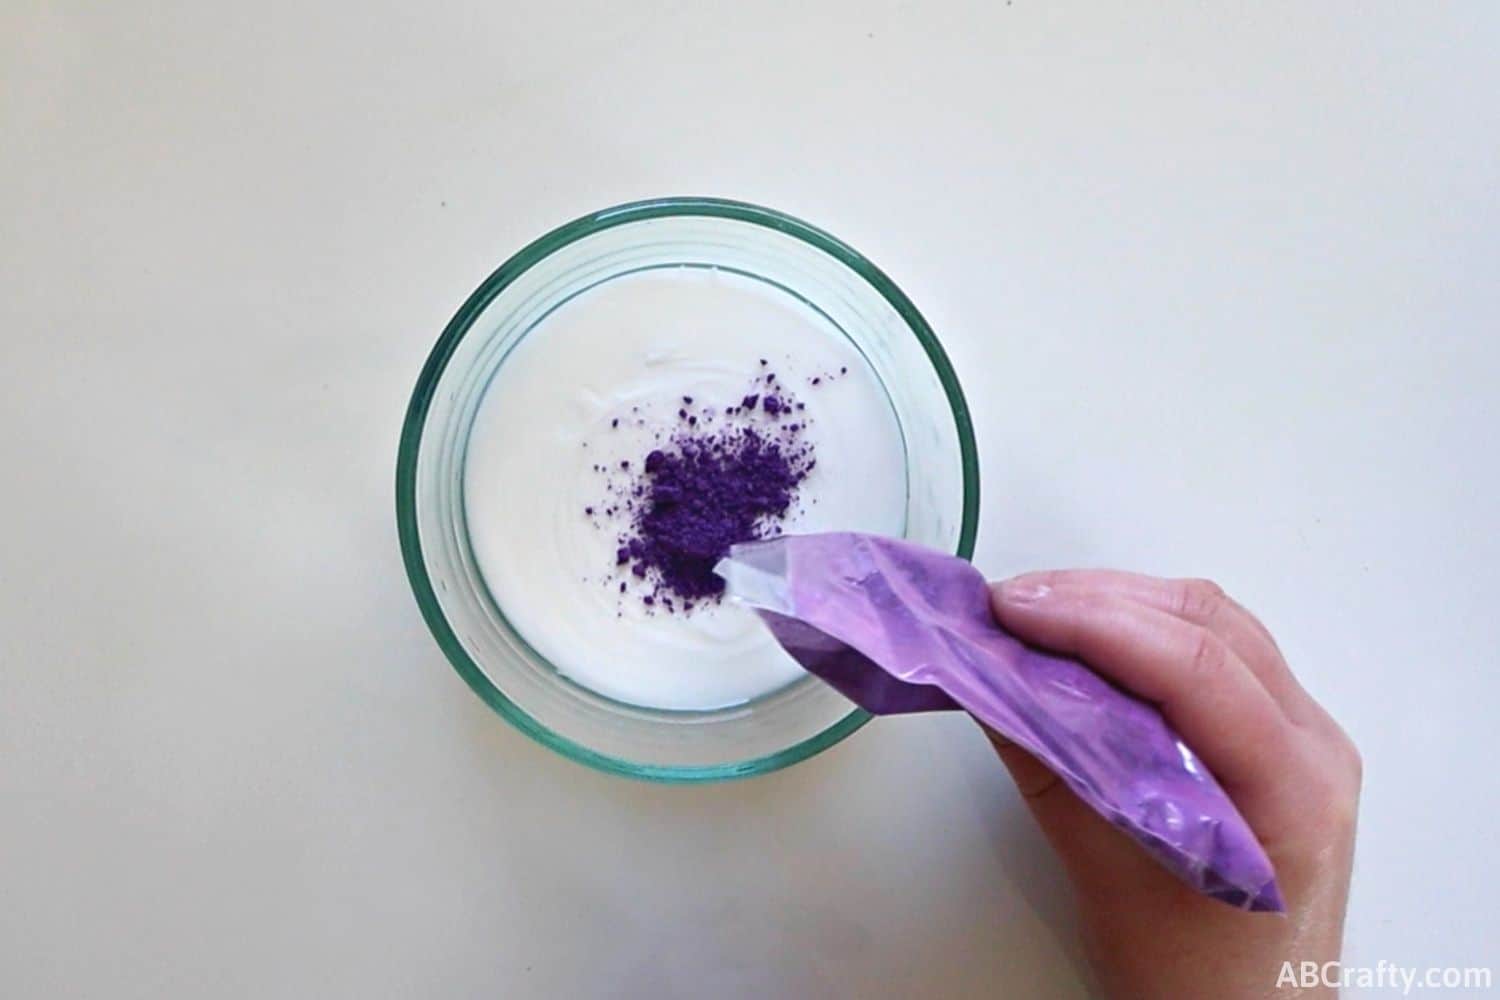 How to Make Color-Changing Thermochromic Slime - WeHaveKids